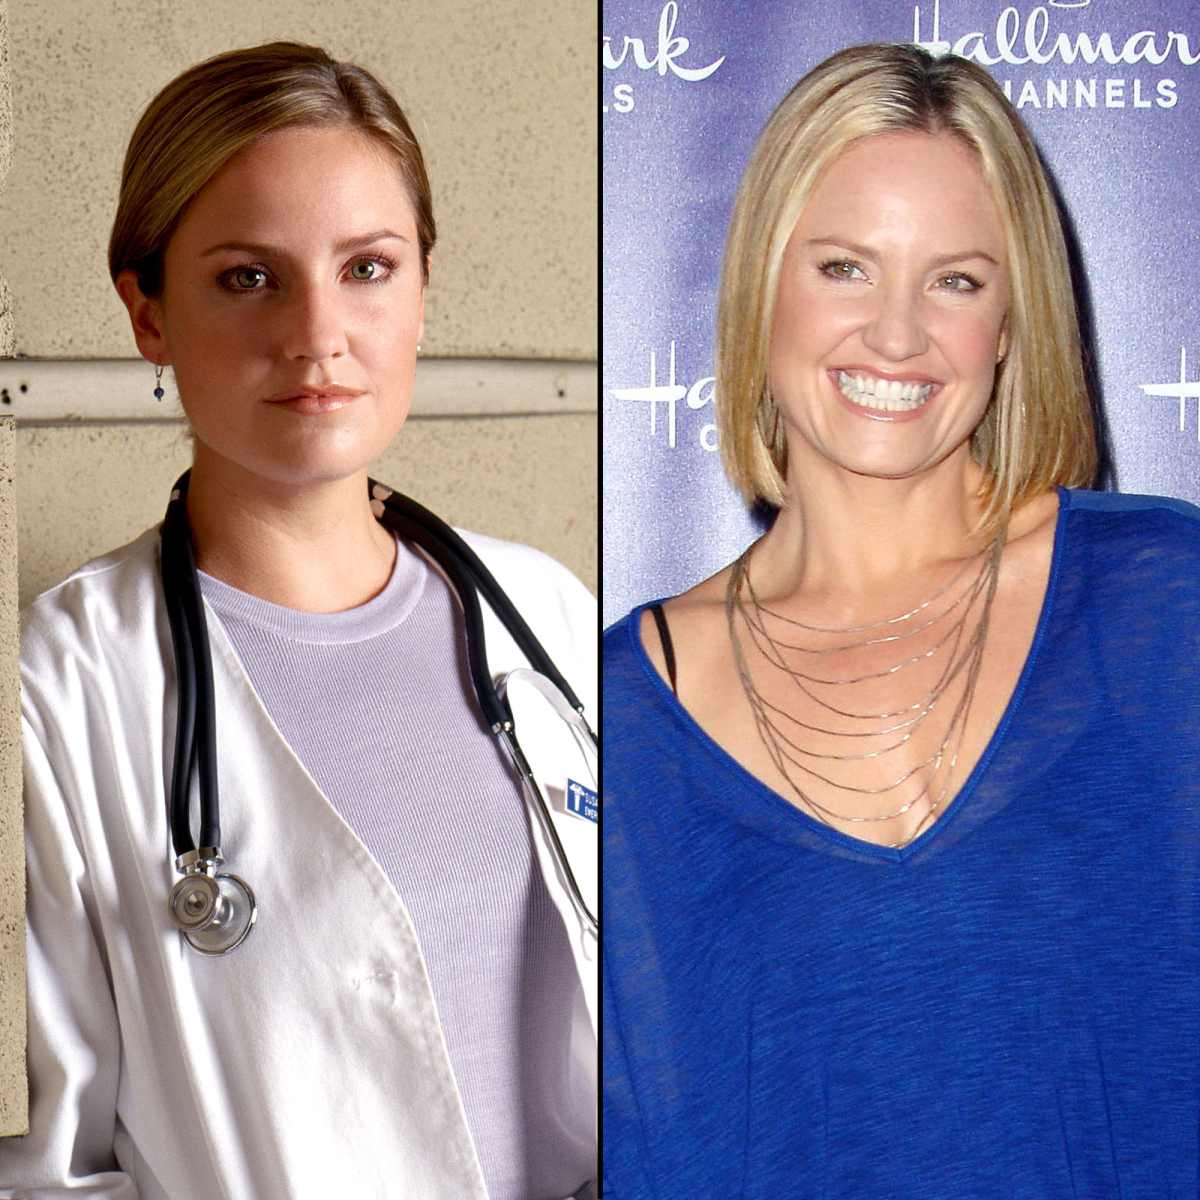 Here Are 23 Pictures Of The Cast Of ER Then Vs. Now